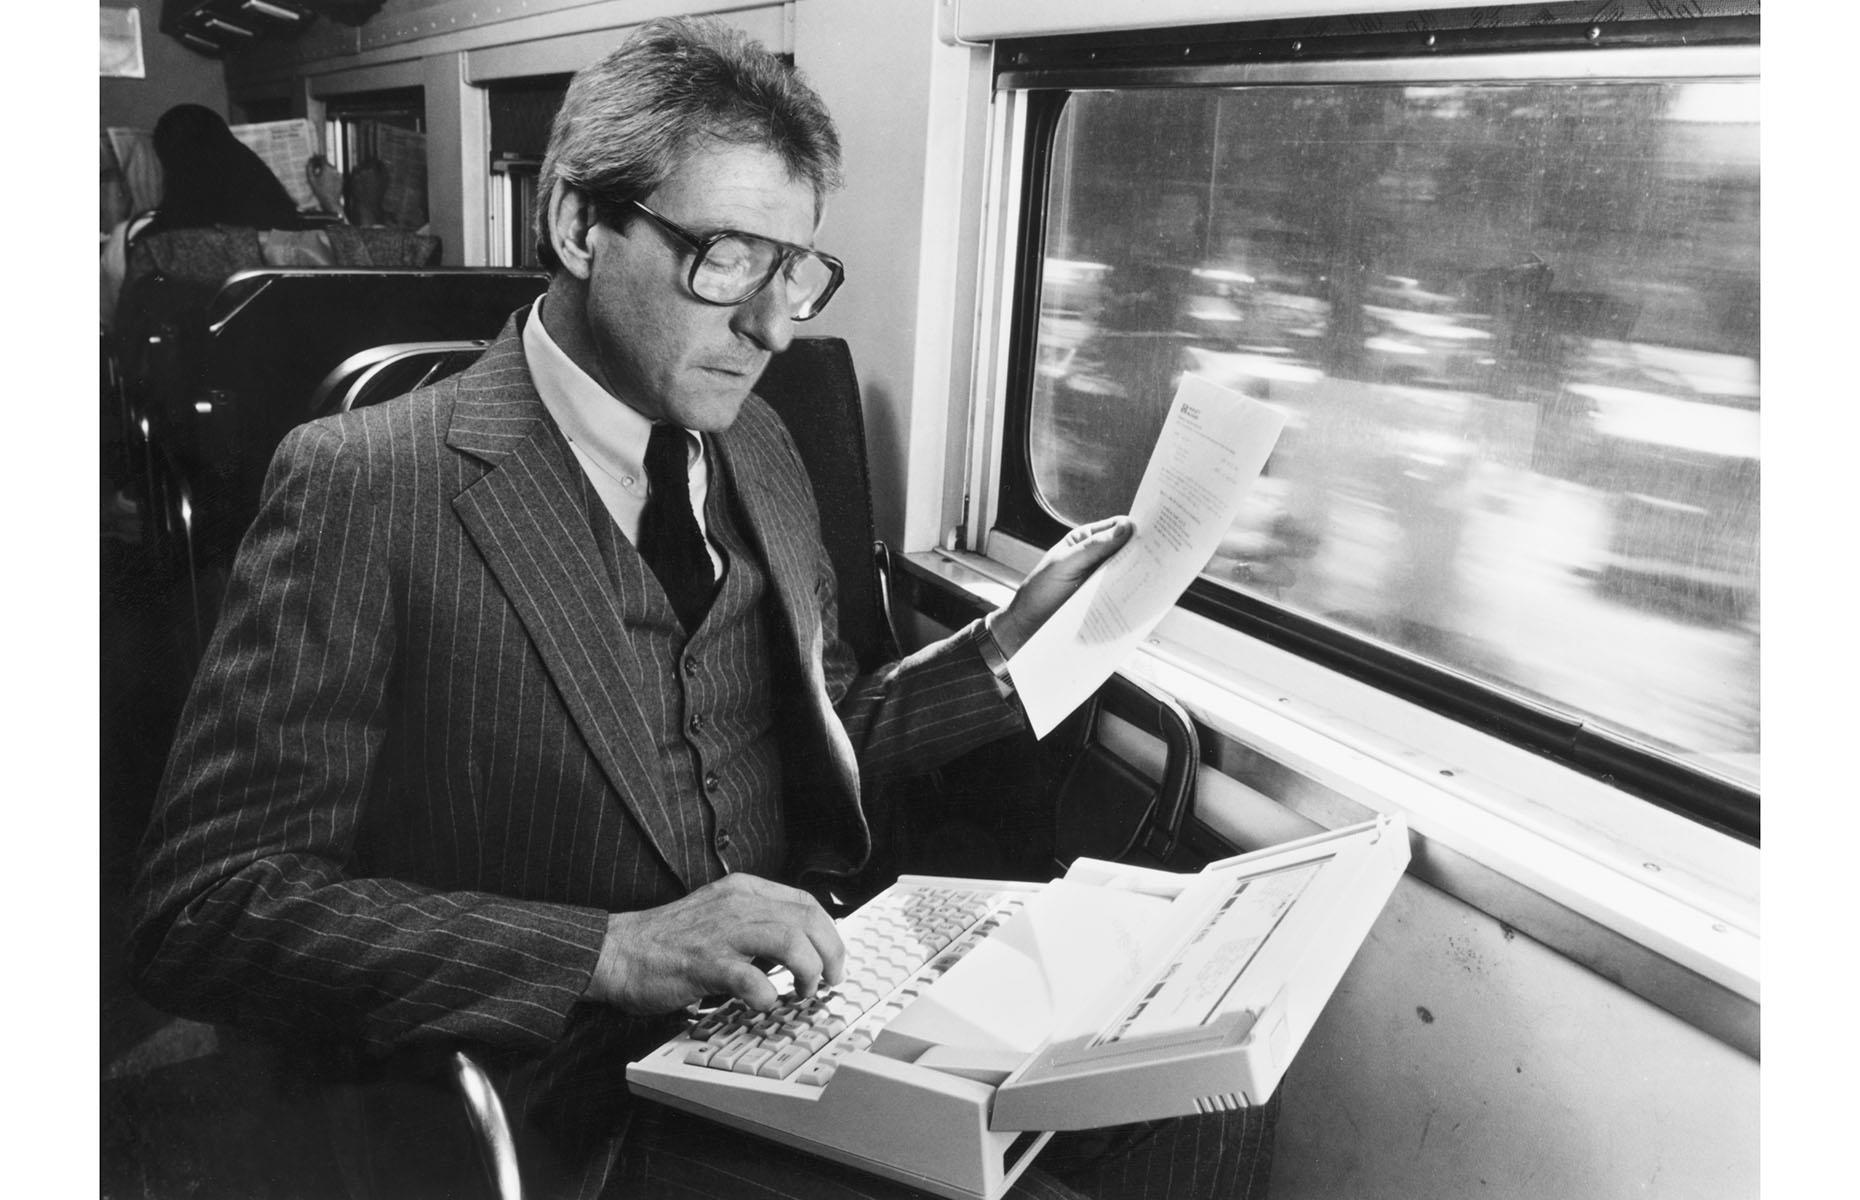 <p>Not at all a surprising sight on any train today, this gentleman from the 1980s is well ahead of his time as he's using precious commute time to do work on an early Hewlett-Packard laptop. Discover <a href="https://www.loveexploring.com/galleries/95350/vintage-photos-of-american-summer-vacations?page=1">vintage photos of American summer vacations</a>.</p>